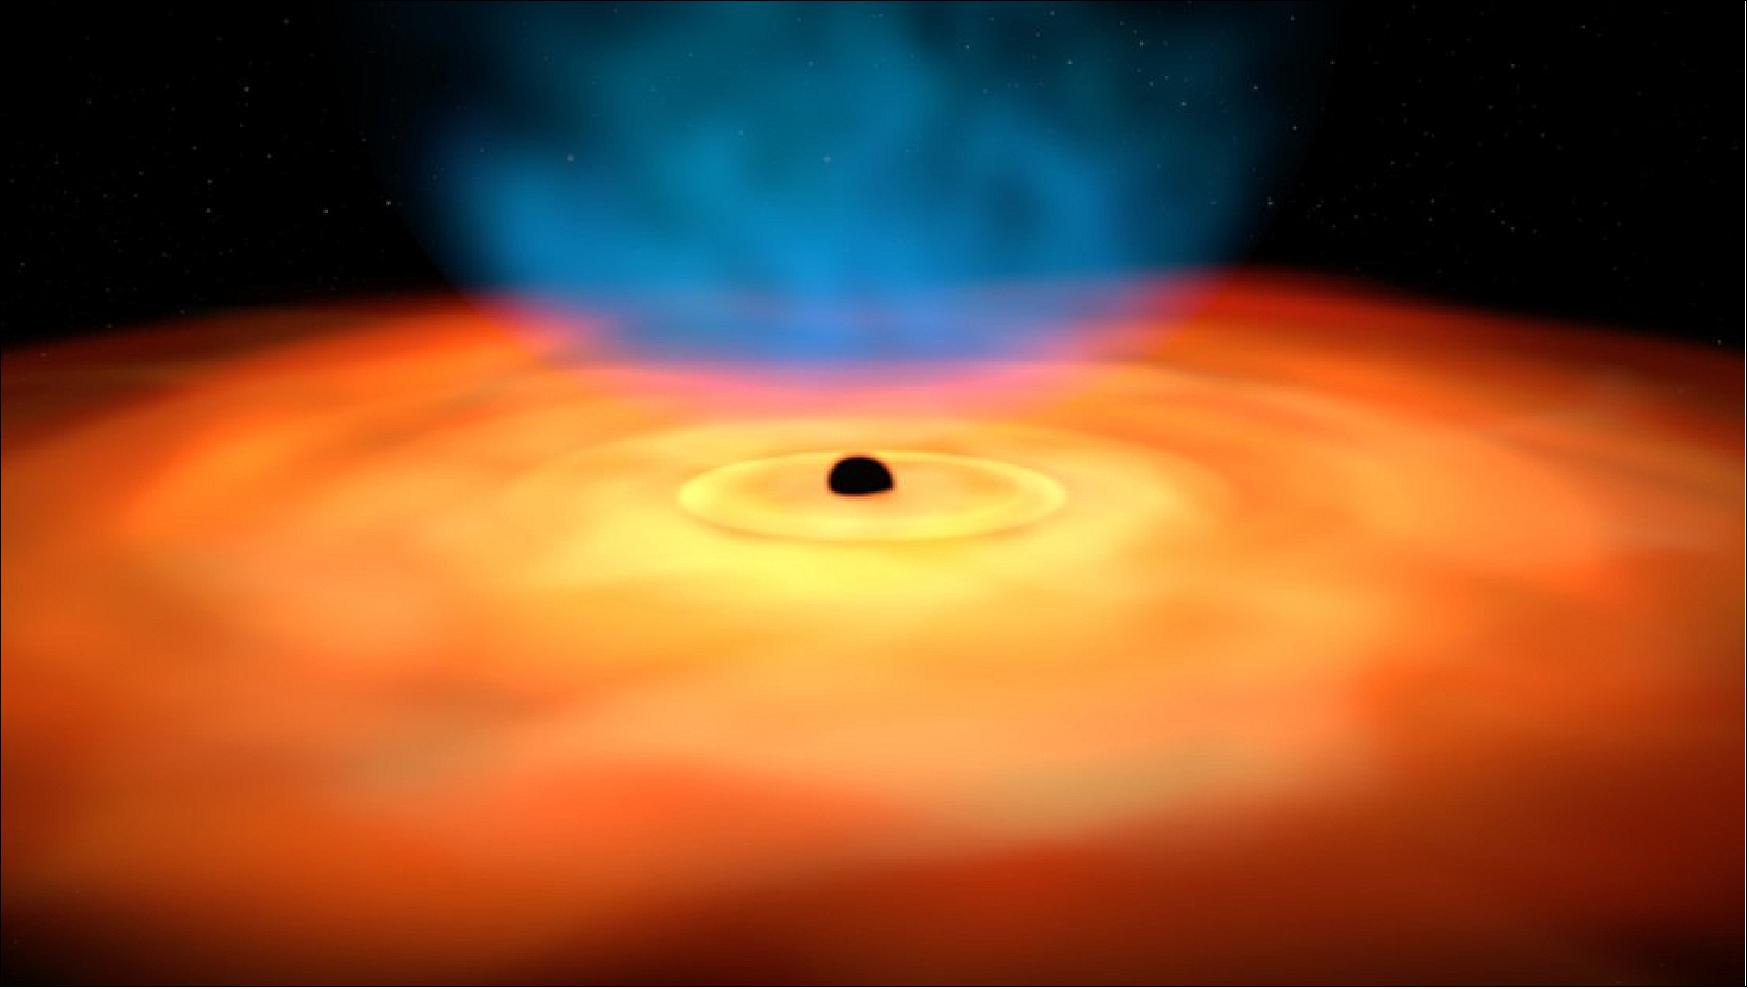 Figure 63: Supermassive black hole: Artist’s impression of a quasar, the core of a galaxy where an active supermassive black hole is pulling in matter from its surroundings at very intense rates. As material falls onto the black hole, it forms a swirling disc that radiates in visible and ultraviolet light; this light, in turn, heats up nearby electrons, generating X-rays. The relation between the ultraviolet and X-ray brightness of quasars can be used to estimate the distance to these sources – something that is notoriously tricky in astronomy – and, ultimately, to probe the expansion history of the Universe. -A team of astronomers has applied this method to a large sample of quasars observed by ESA’s XMM-Newton to investigate the history of our cosmos up to 12 billion years ago, finding there might be more to the early expansion of the Universe than predicted by the standard model of cosmology (image credit: ESA–C. Carreau)